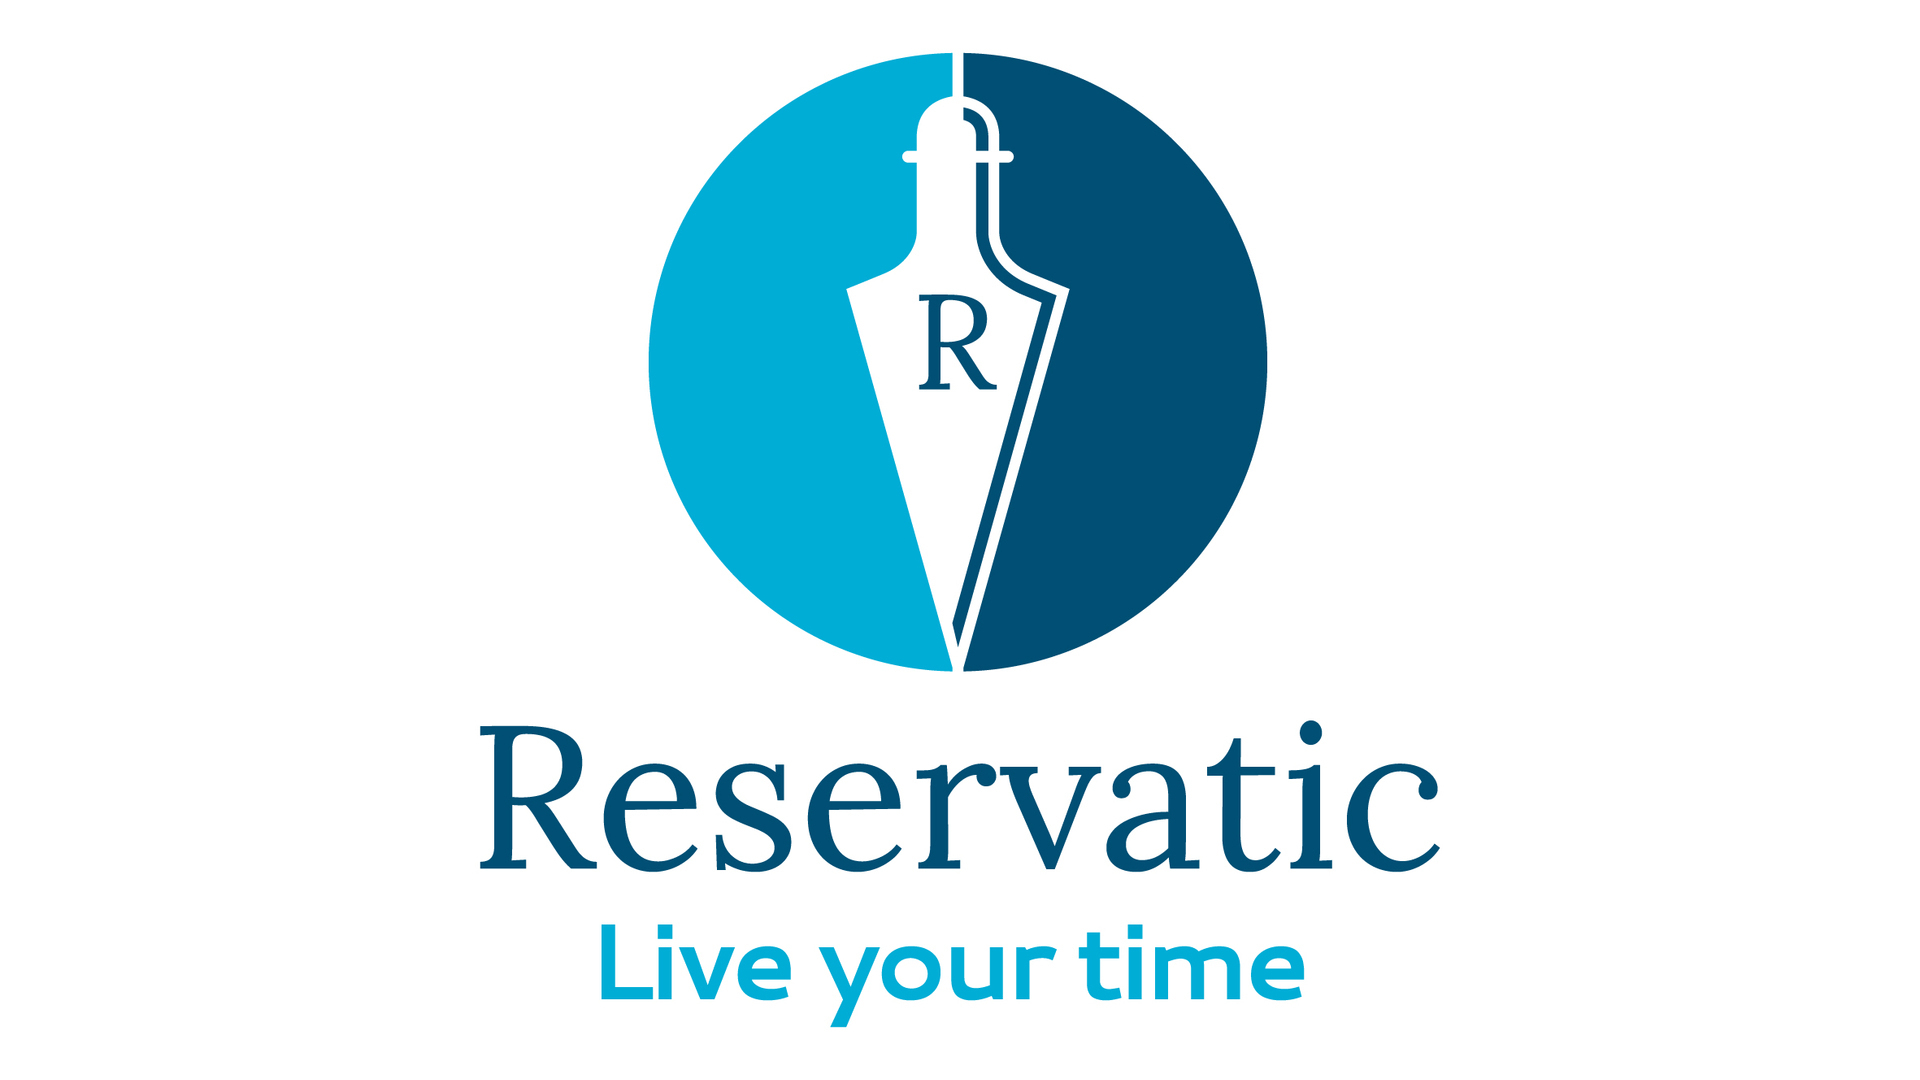 Public holidays functionality for Reservatic